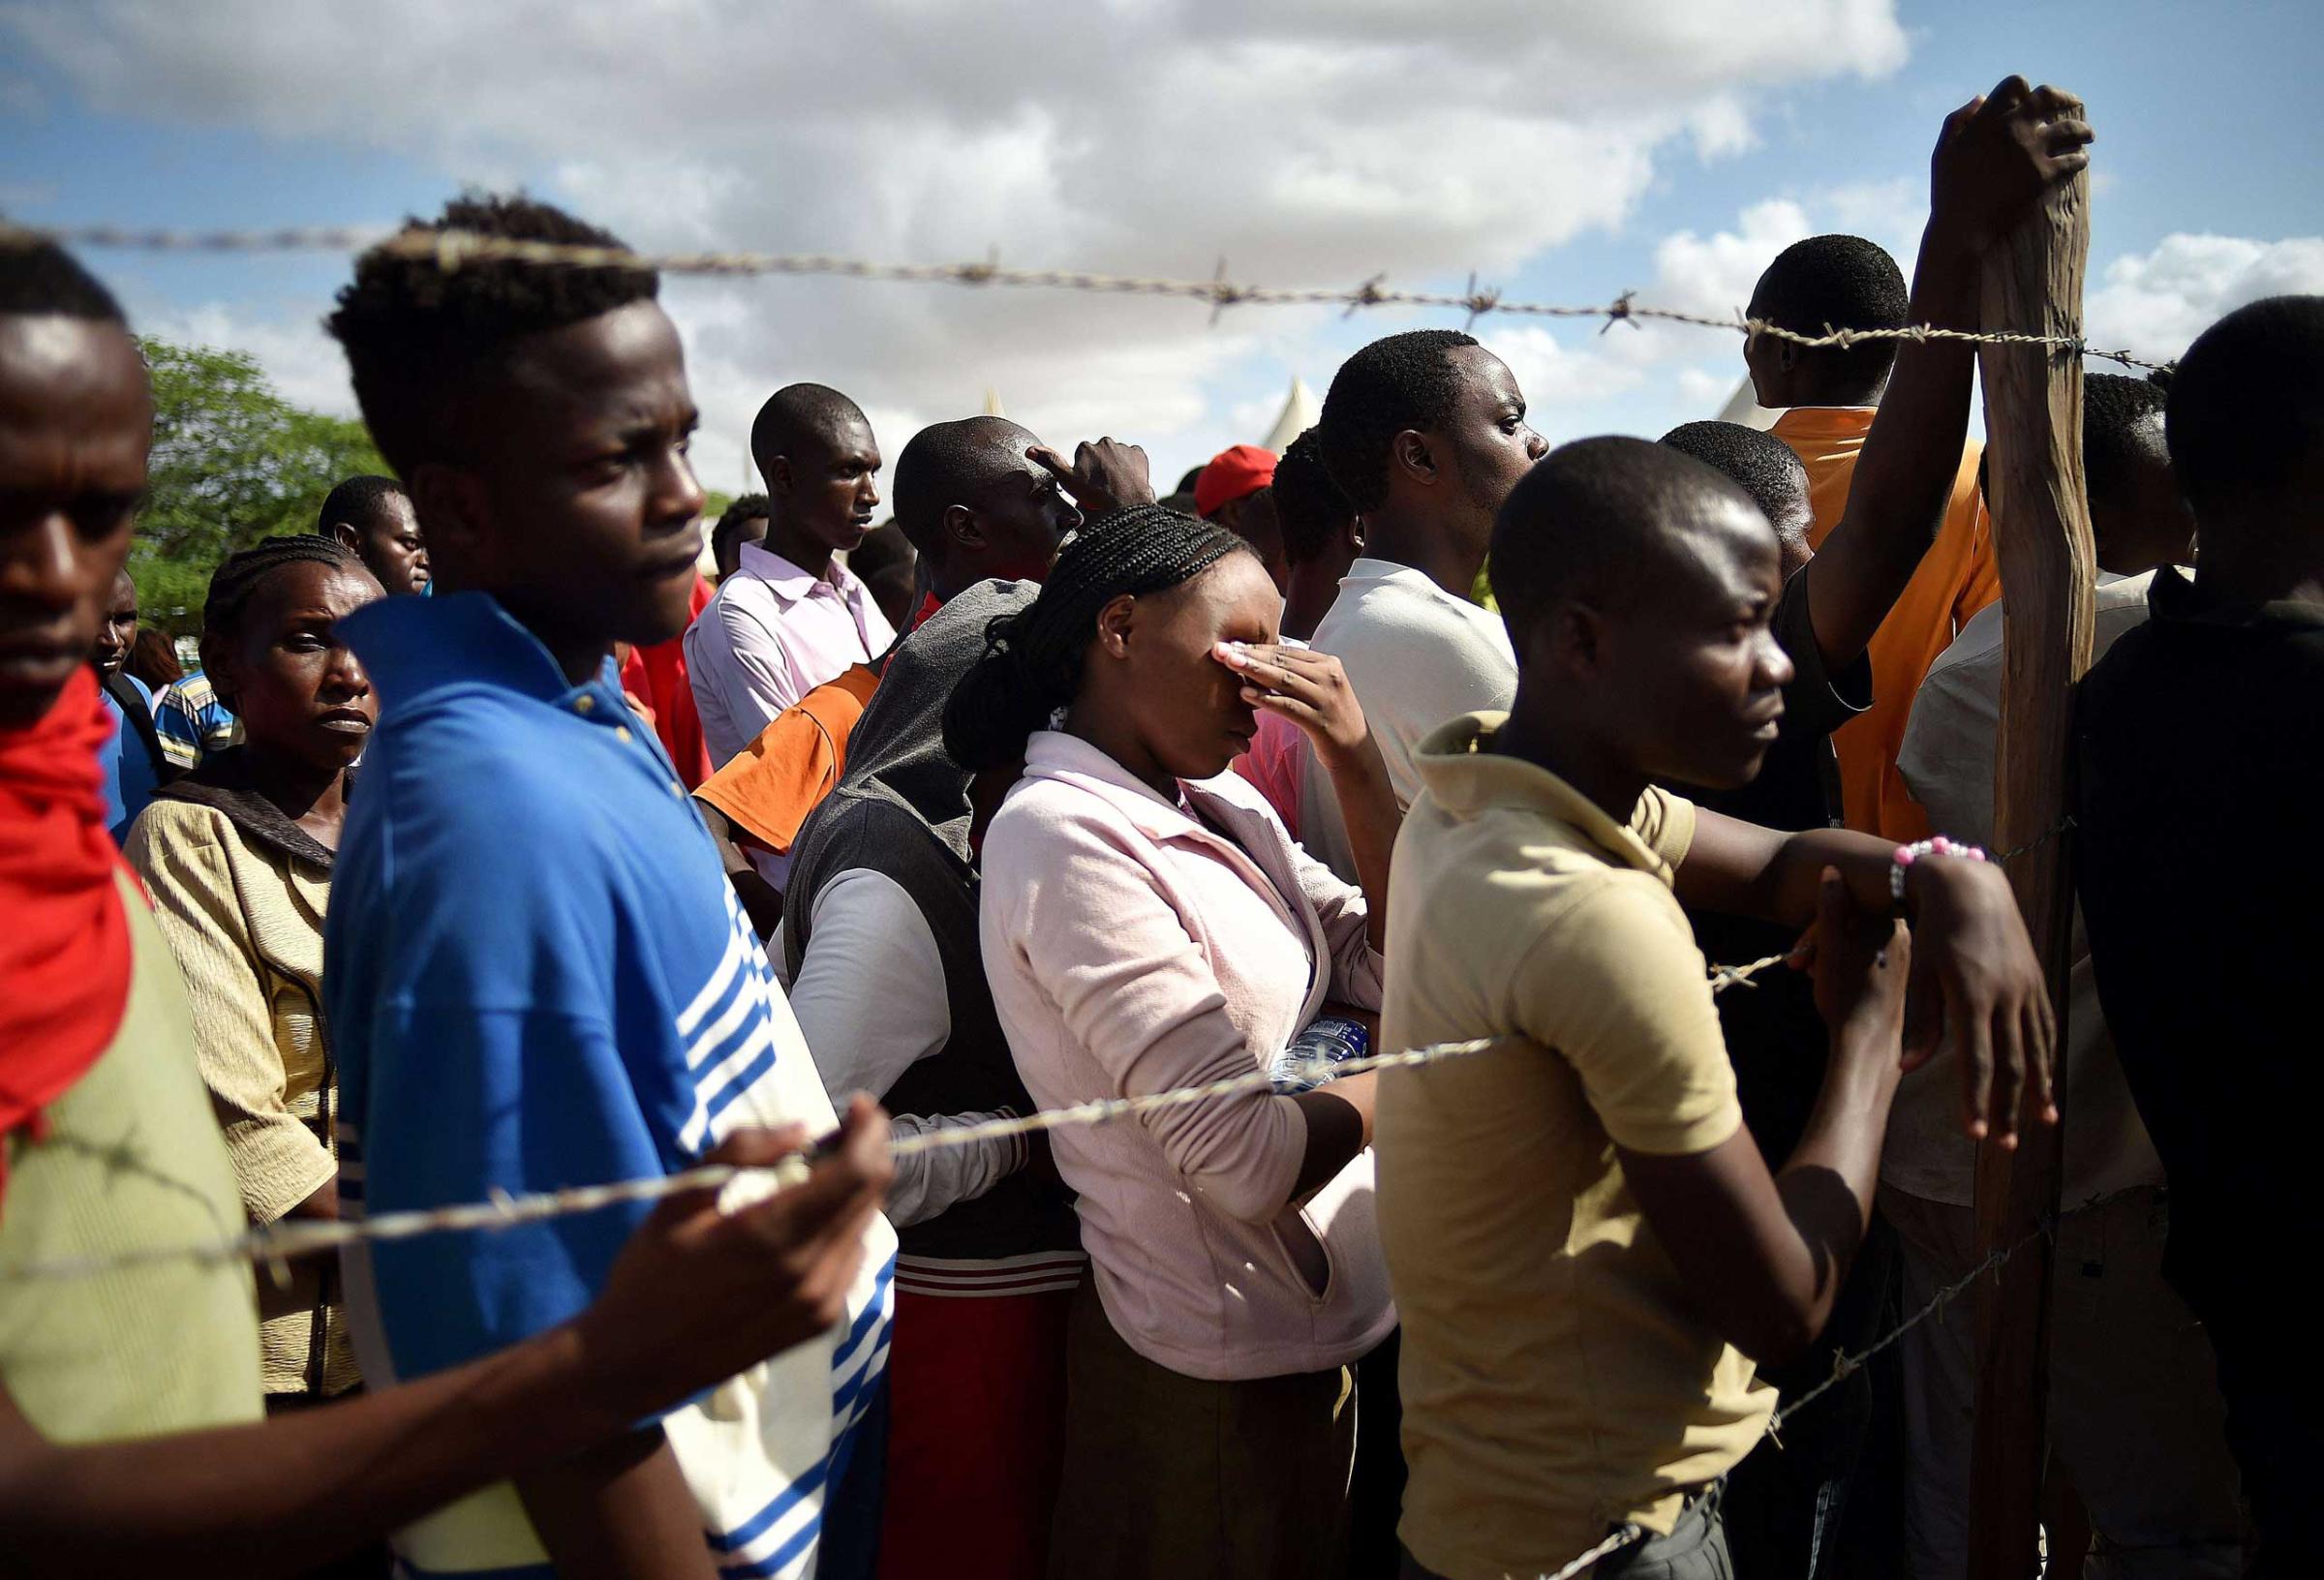 Students evacuated from Garissa University listen to an address by Interior Minister for Security Joseph Ole Nkaissery before they are transported to their home regions from a holding area on April 3, 2015.